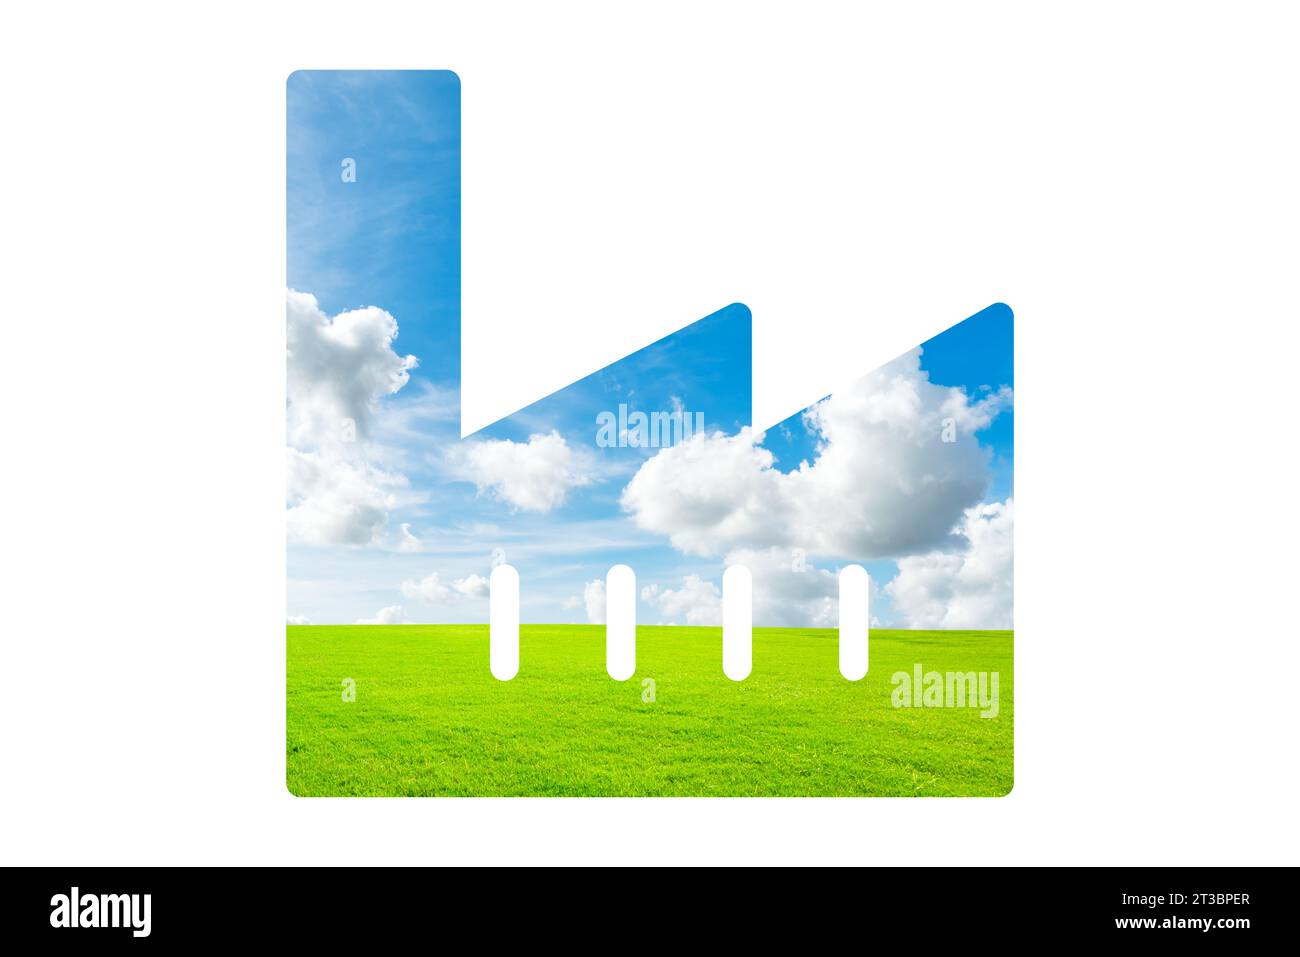 Co2 cloud factory black vector icon. Carbon dioxide industrial footprint pollution filled symbol. Stock Photo